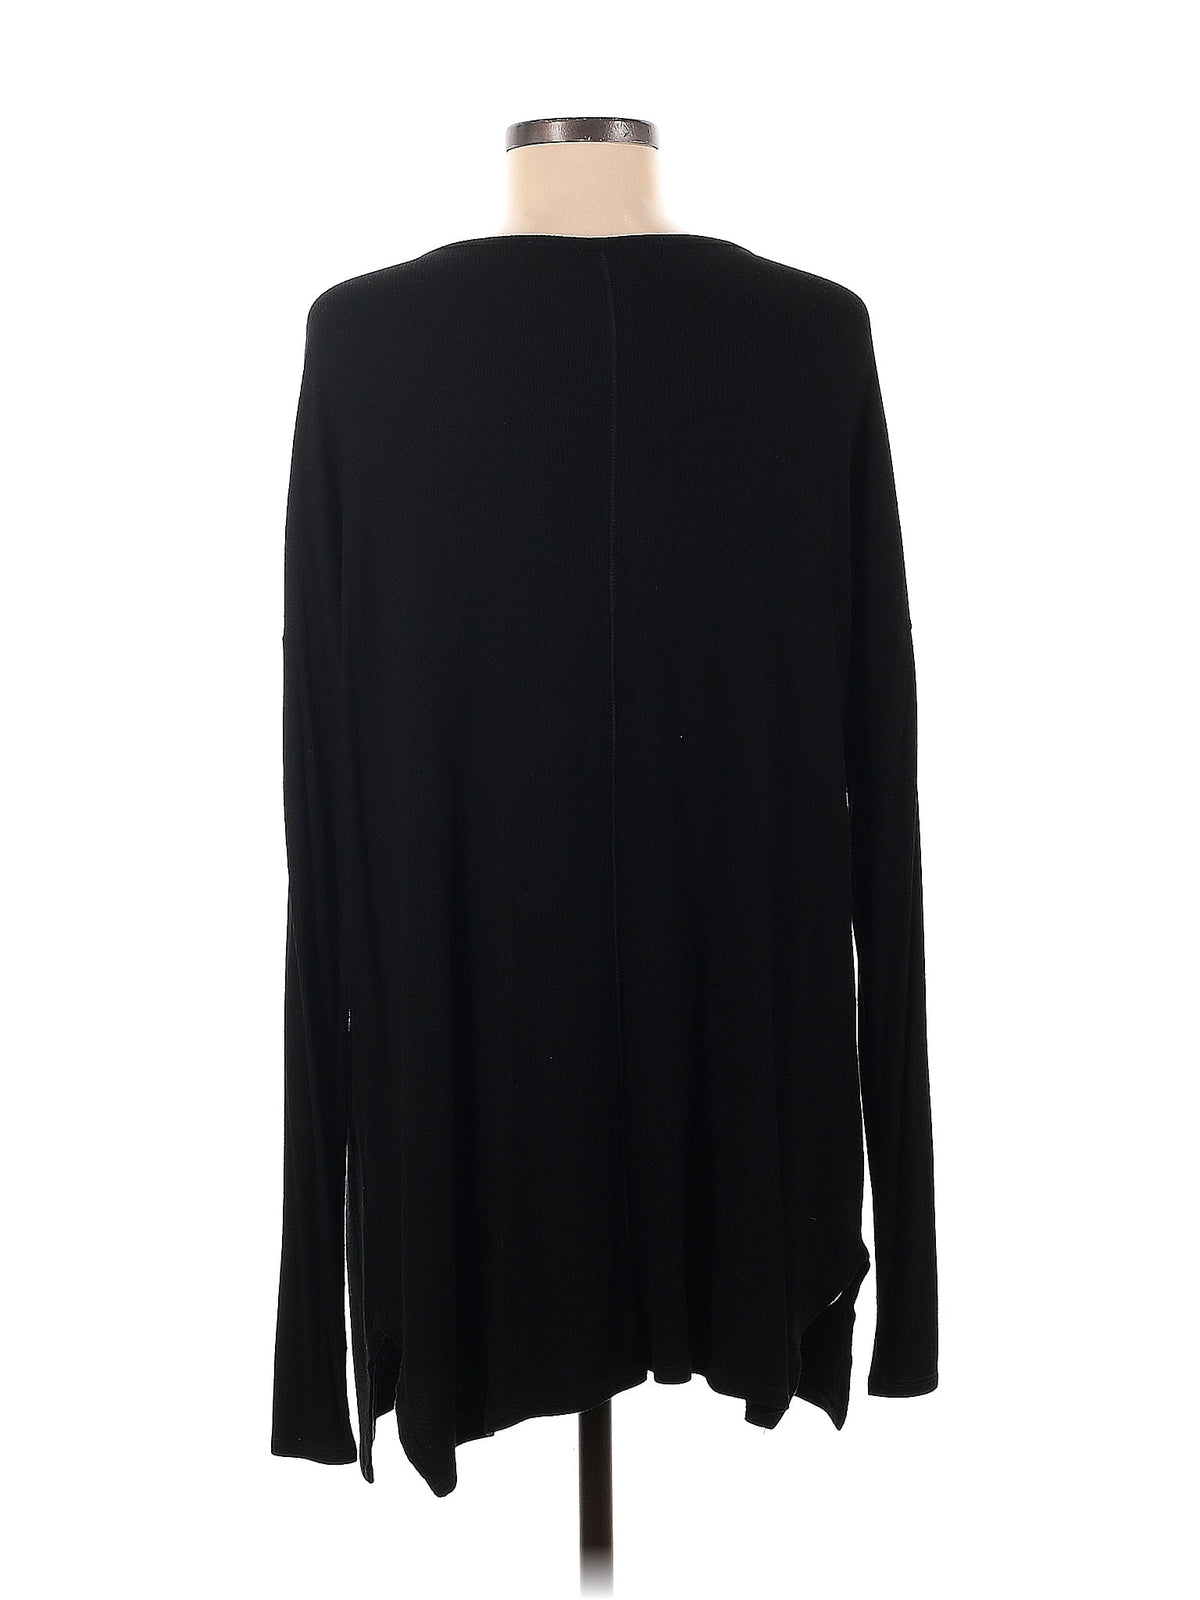 Long Sleeve Top size - One Size